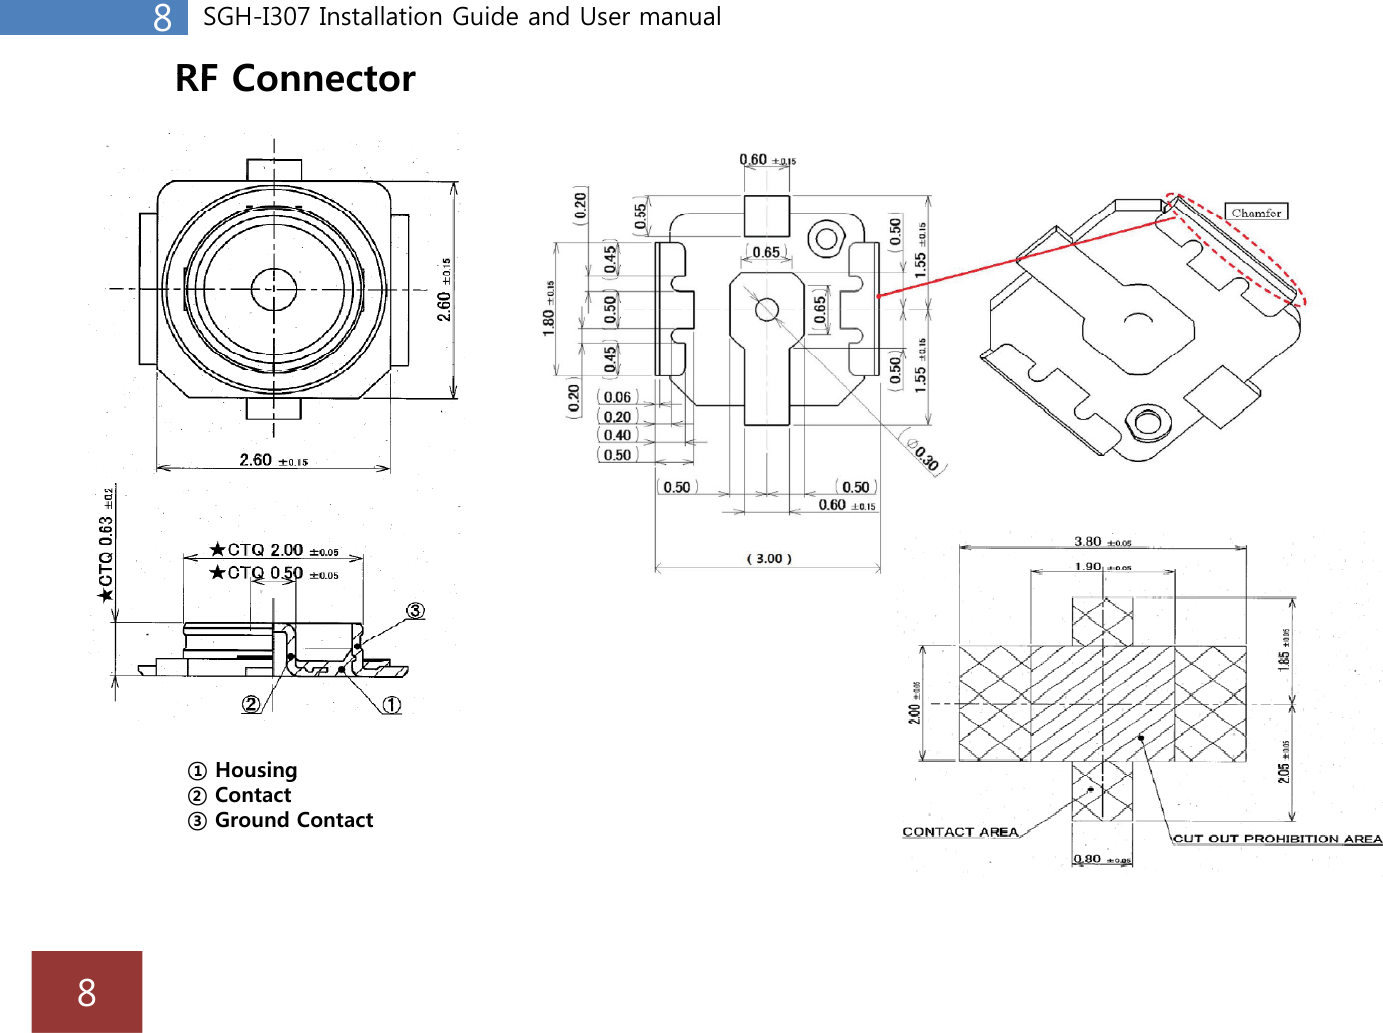 8SGH-I307 Installation Guide and User manualRF ConnectorRF Connector①Housing①Housing②Contact③ Ground Contact8